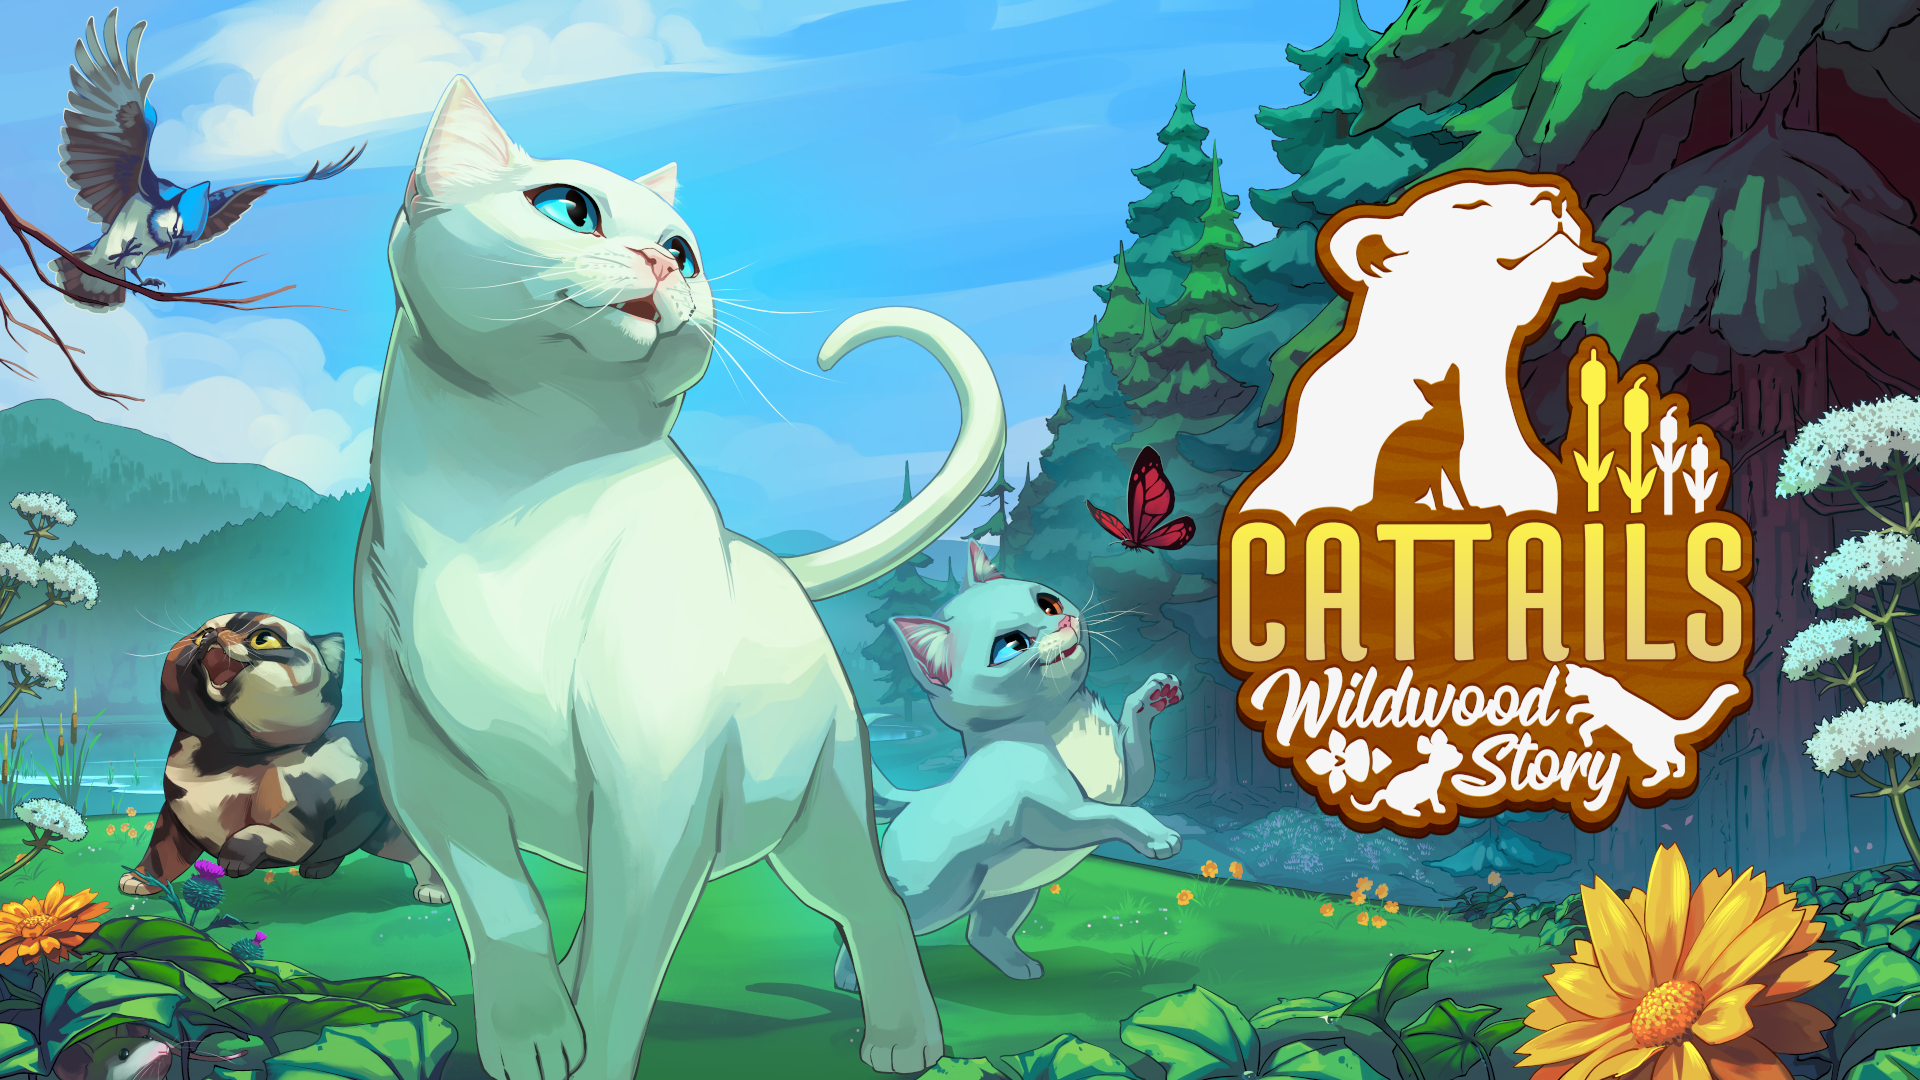 Cattails: Wildwood Story | Become a Cat!